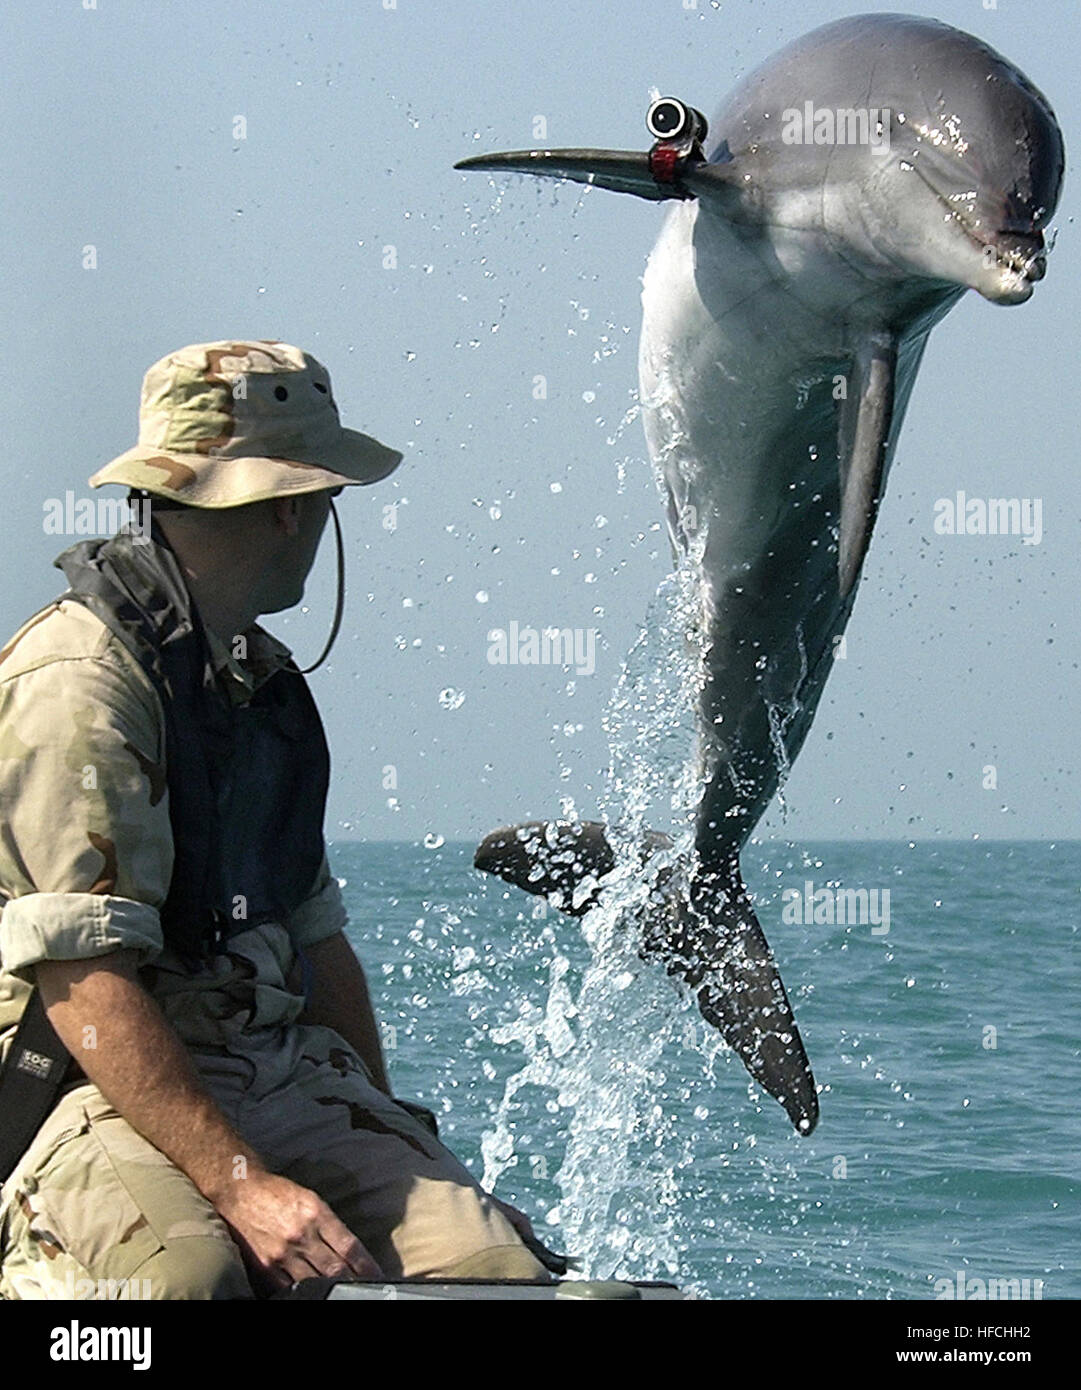 030318-N-5319A-002 Central Command Area of Responsibility (Mar. 18, 2003) -- K-Dog, a Bottle Nose Dolphin belonging to Commander Task Unit (CTU) 55.4.3, leaps out of the water in front Sgt. Andrew Garrett while training near the USS Gunston Hall (LSD 44) in the Arabian Gulf. Attached to the dolphinÕs pectoral fin is a ÒpingerÓ device that allows the handler to keep track of the dolphin when out of sight. CTU-55.4.3 is a multi-national team consisting of Naval Special Clearance Team-One, Fleet Diving Unit Three from the United Kingdom, Clearance Dive Team from Australia, and Explosive Ordnance  Stock Photo